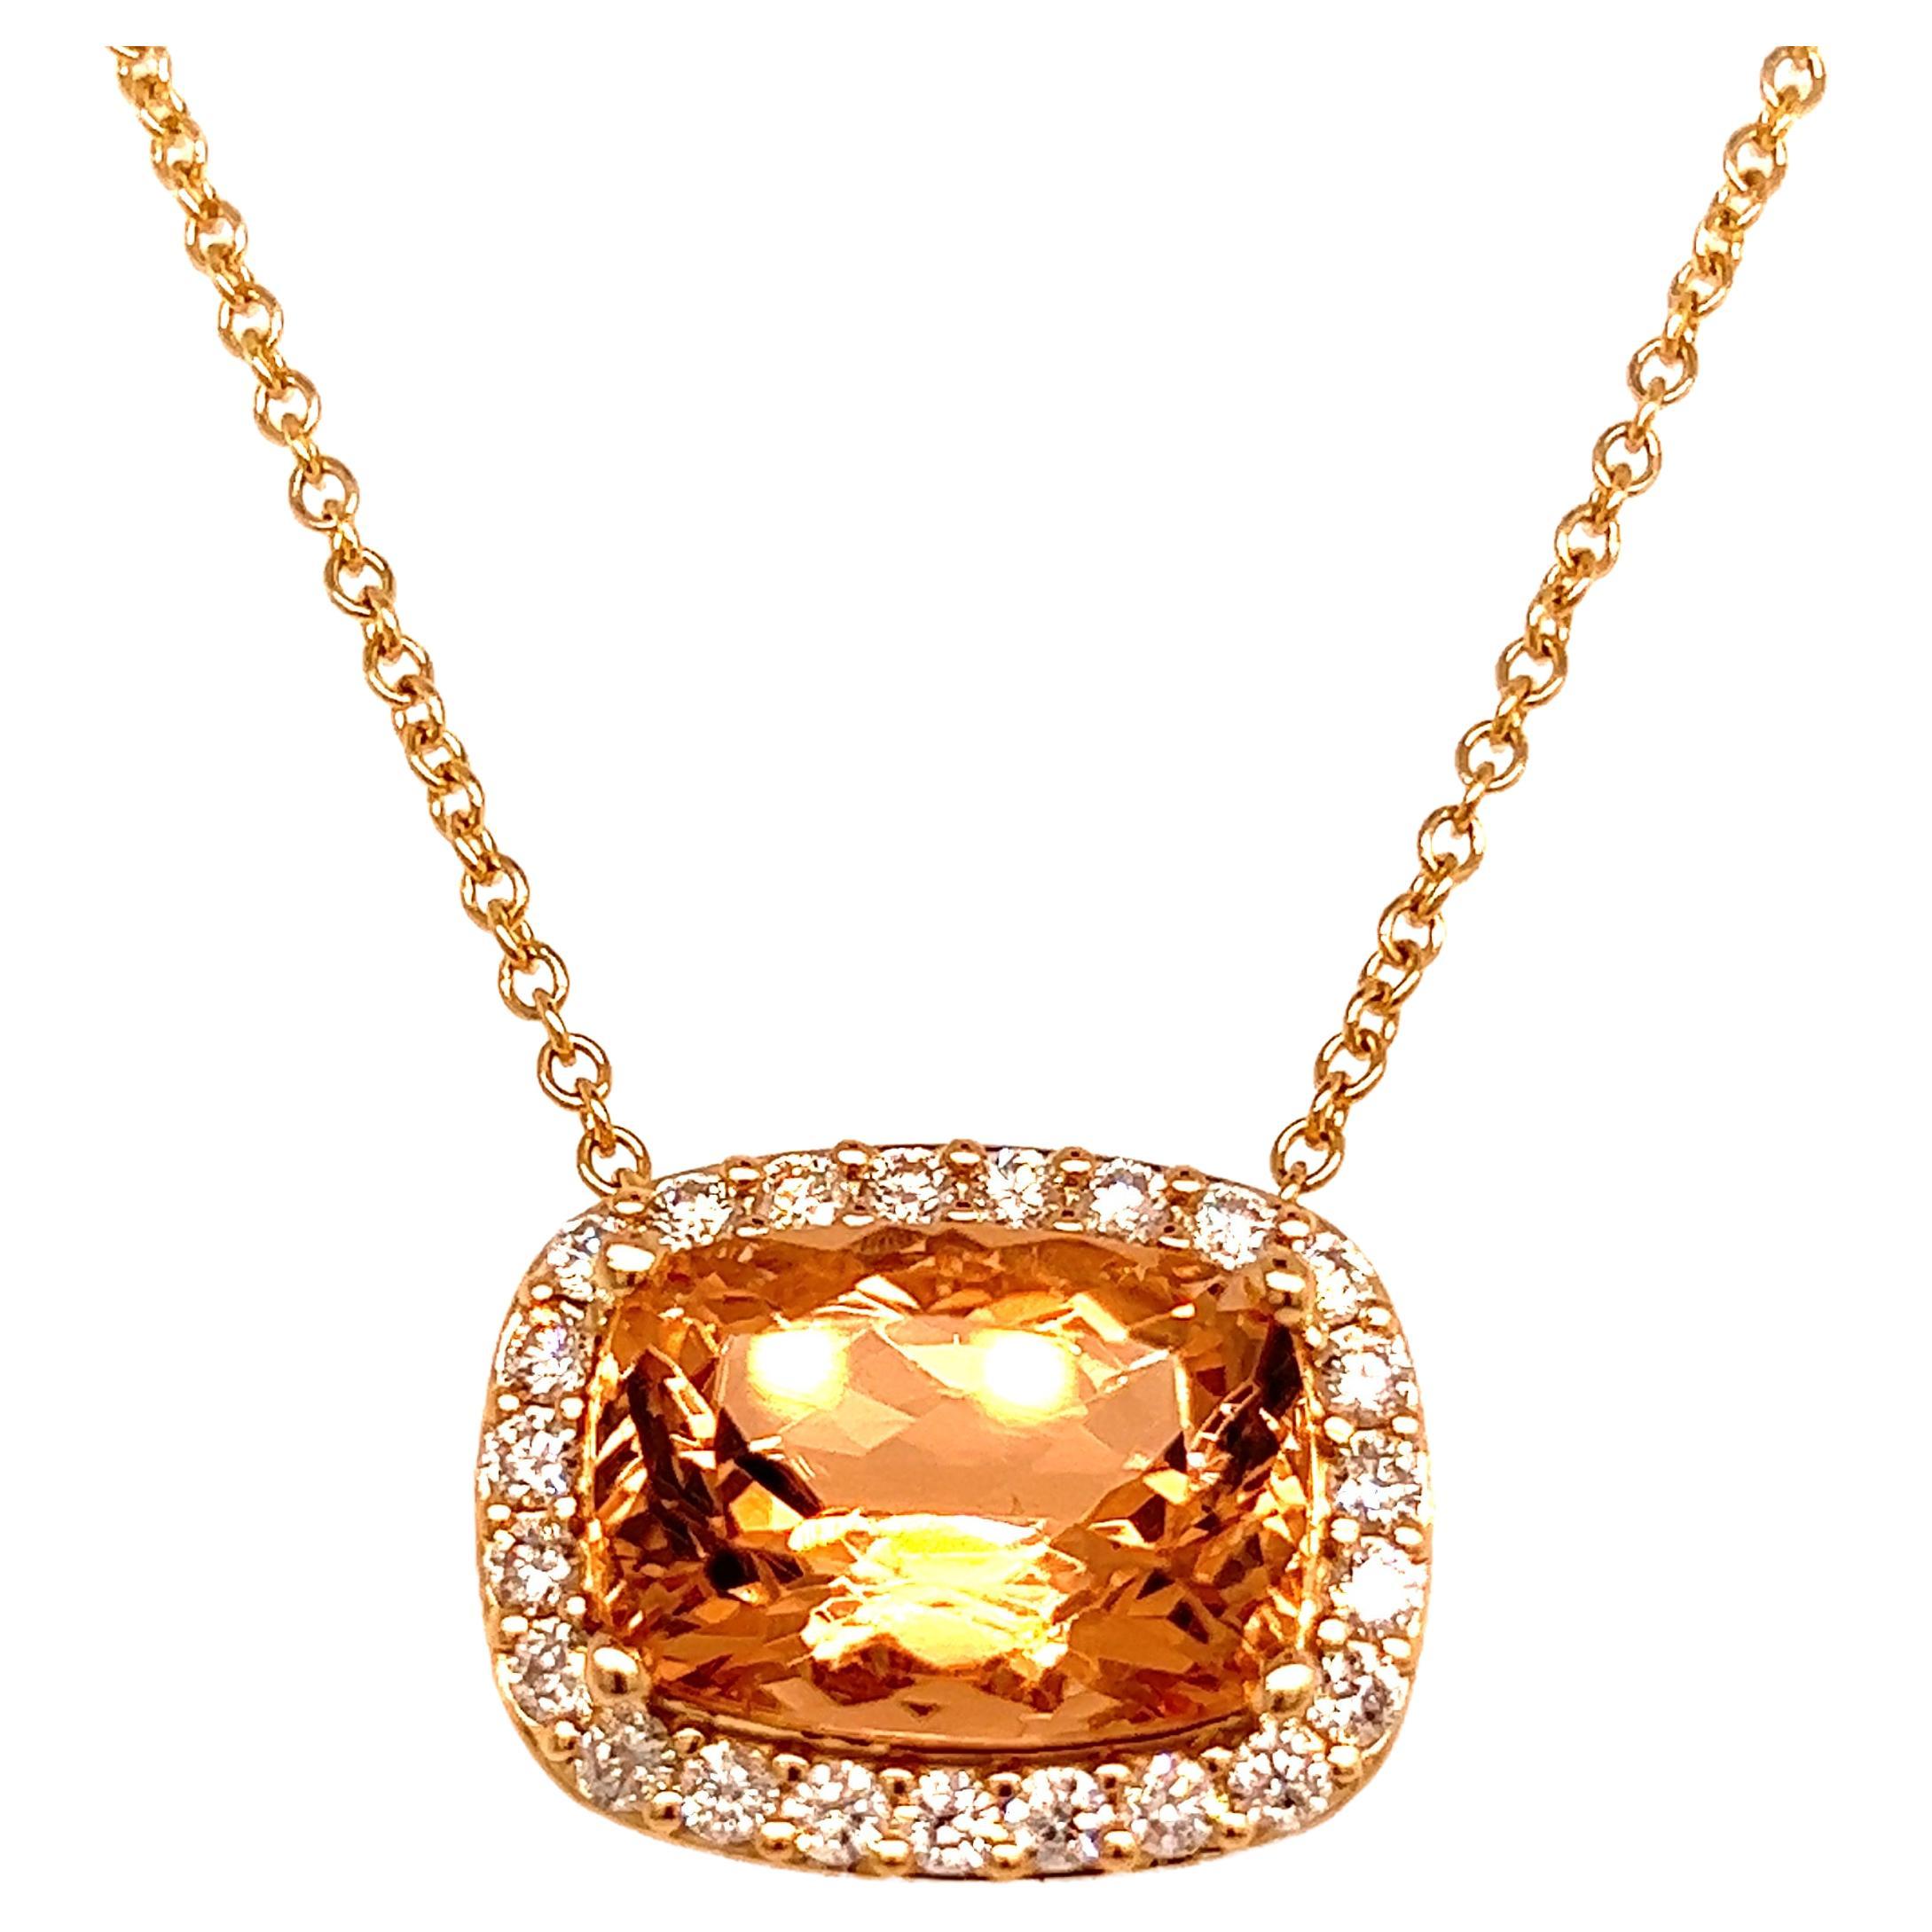 Diamond Morganite Pendant Necklace 14k Gold 7.35 TCW Certified For Sale